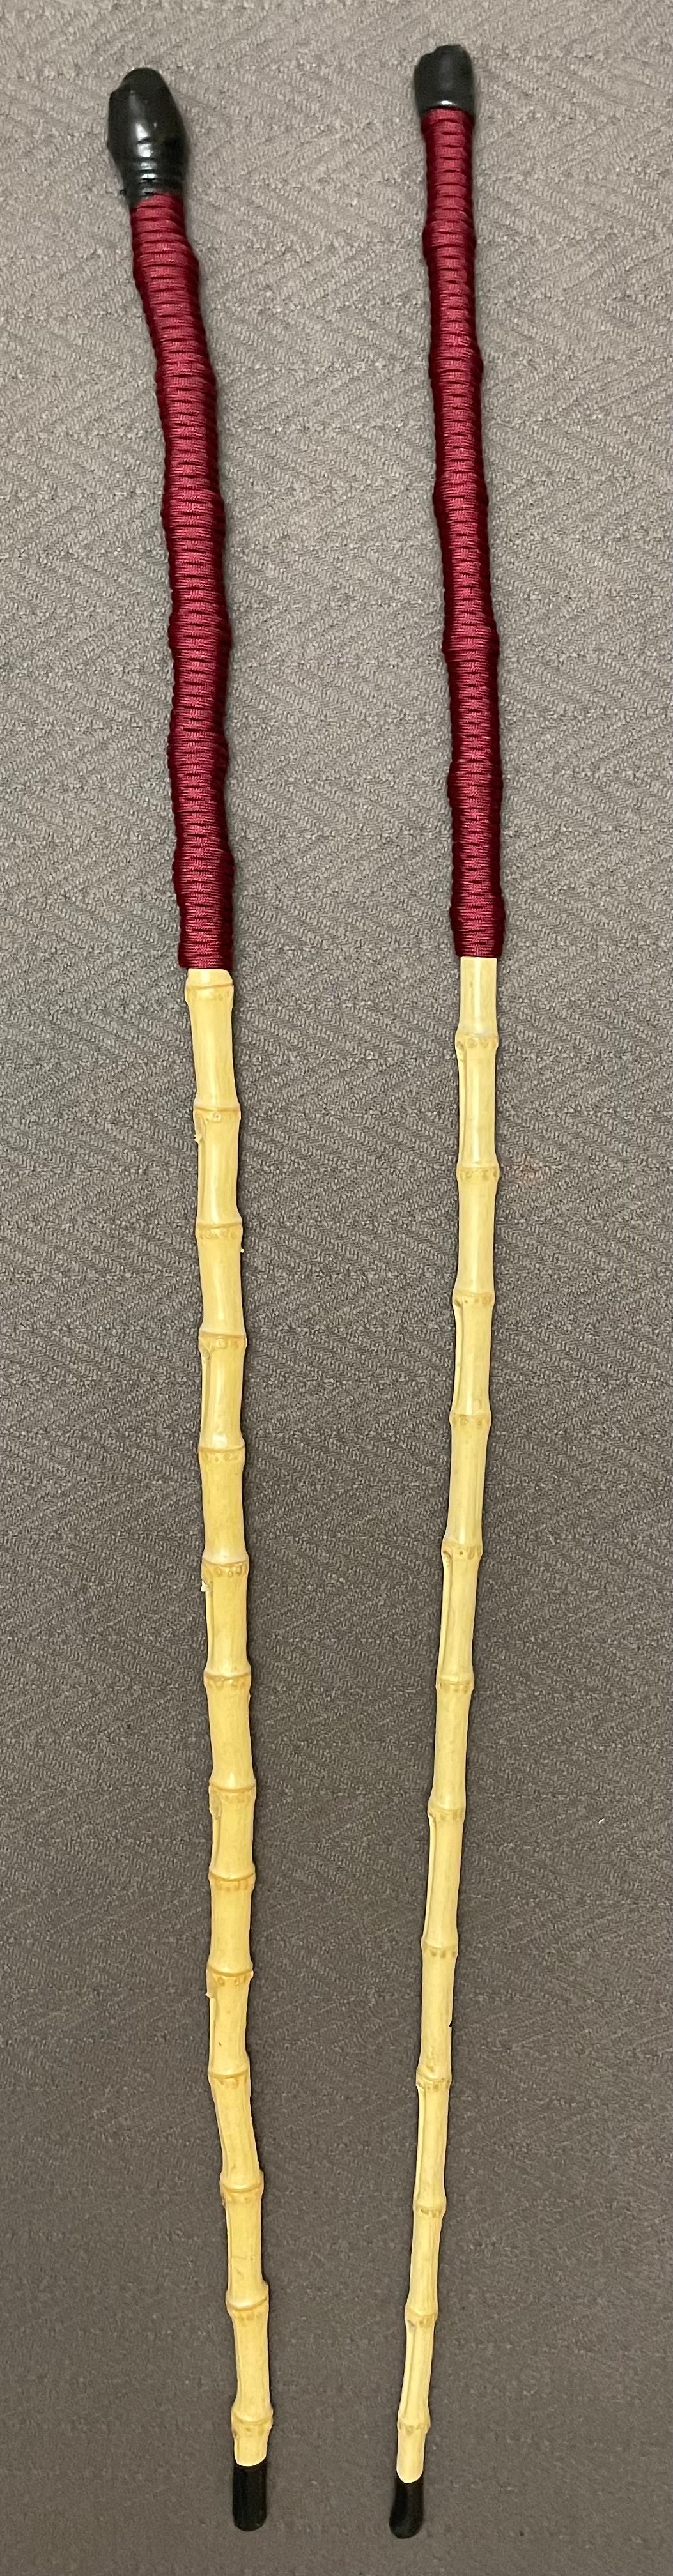 Whangee Punishment Cane (Paracord Handle) - 32 - 35" Length & 9-11mm OR 12-14mm Thickness